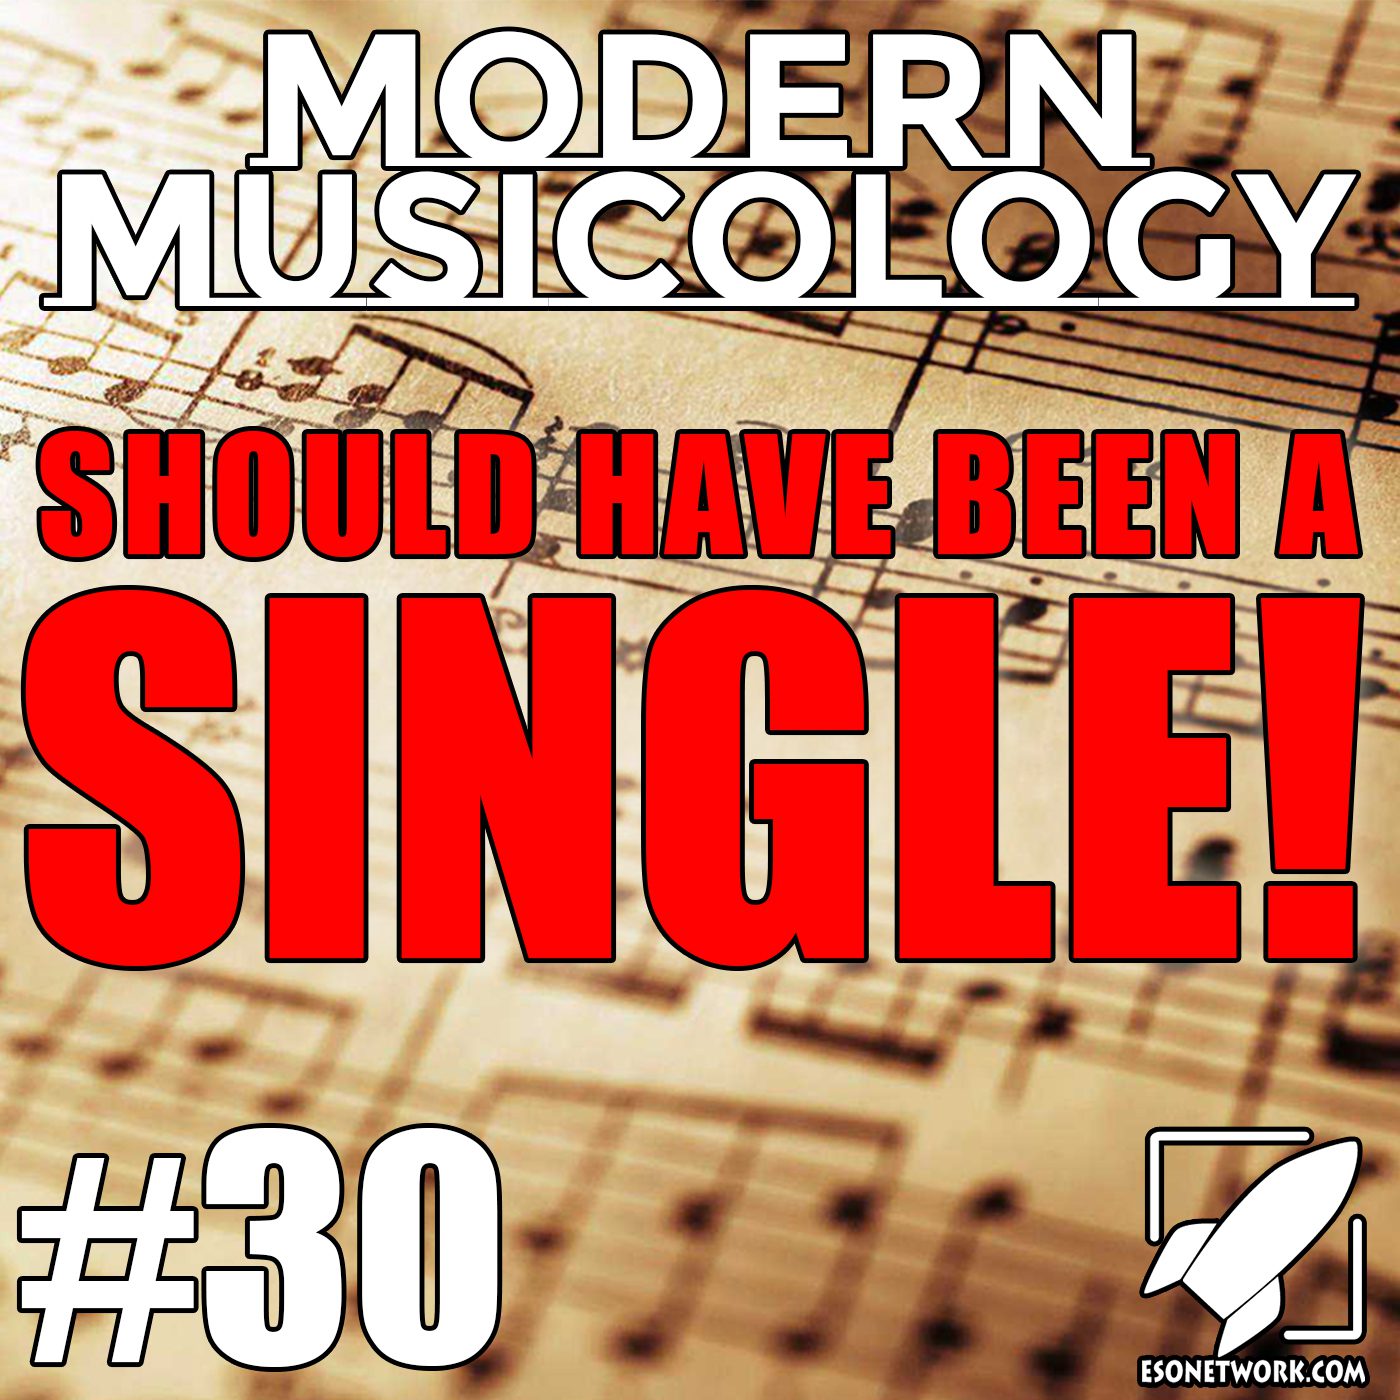 Modern Musicology #30 - Should Have Been a Single!